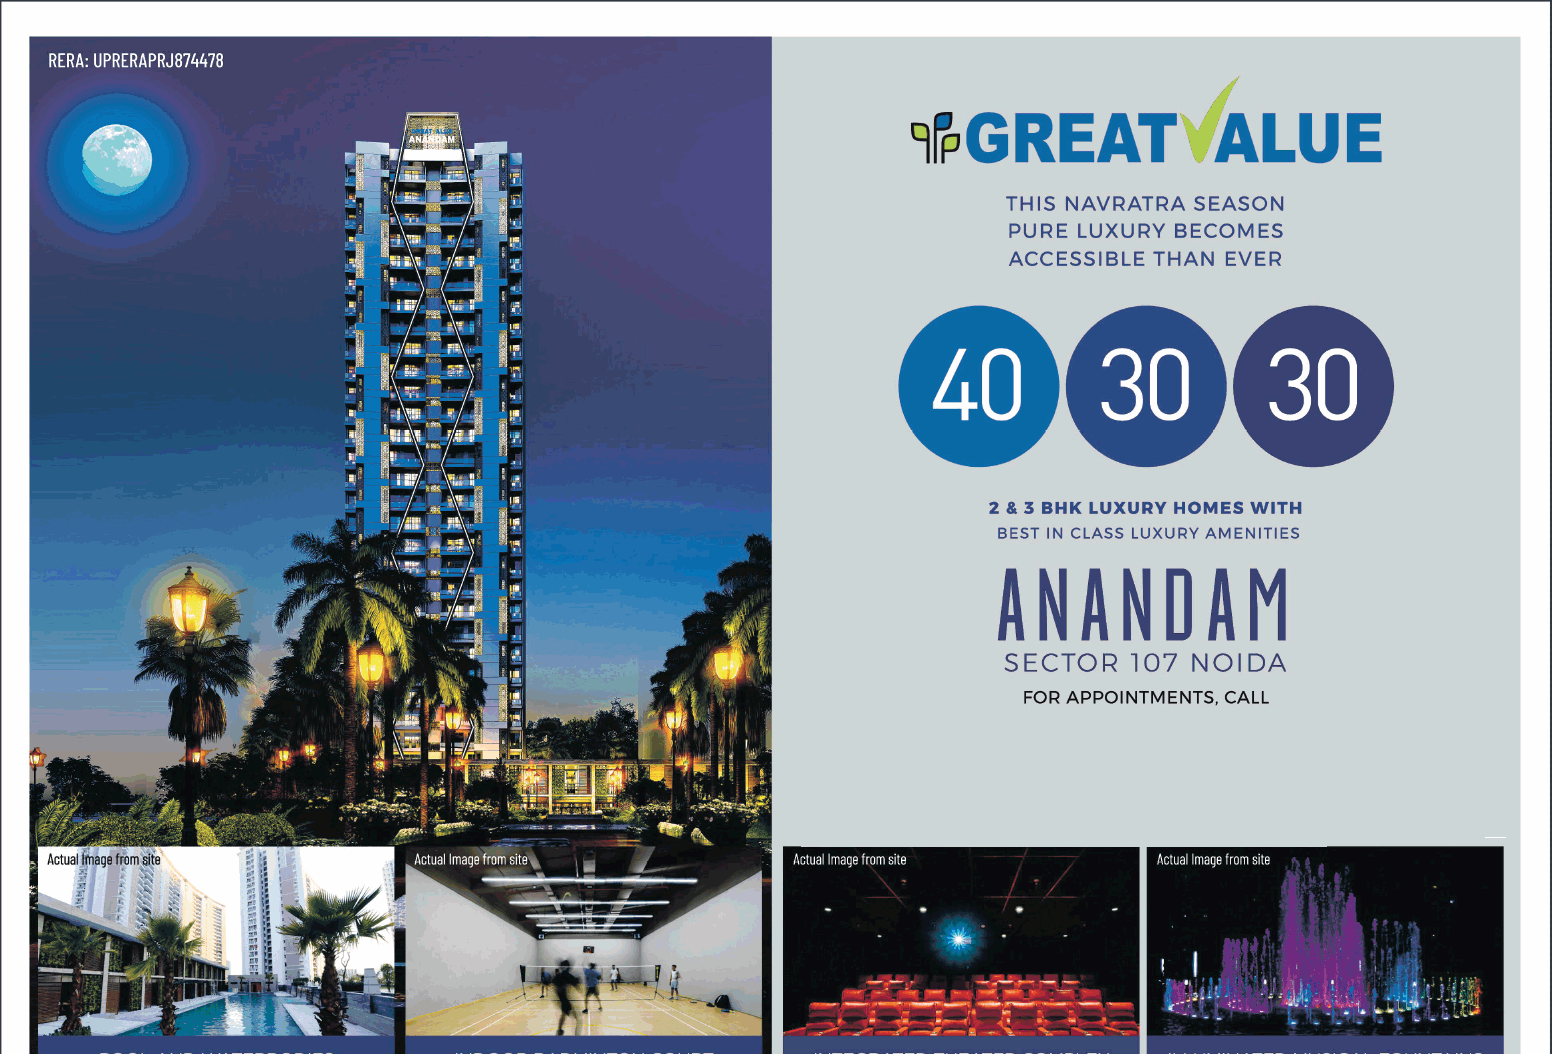 2 and 3 BHK luxury homes at Great Value Anandam, Noida Update